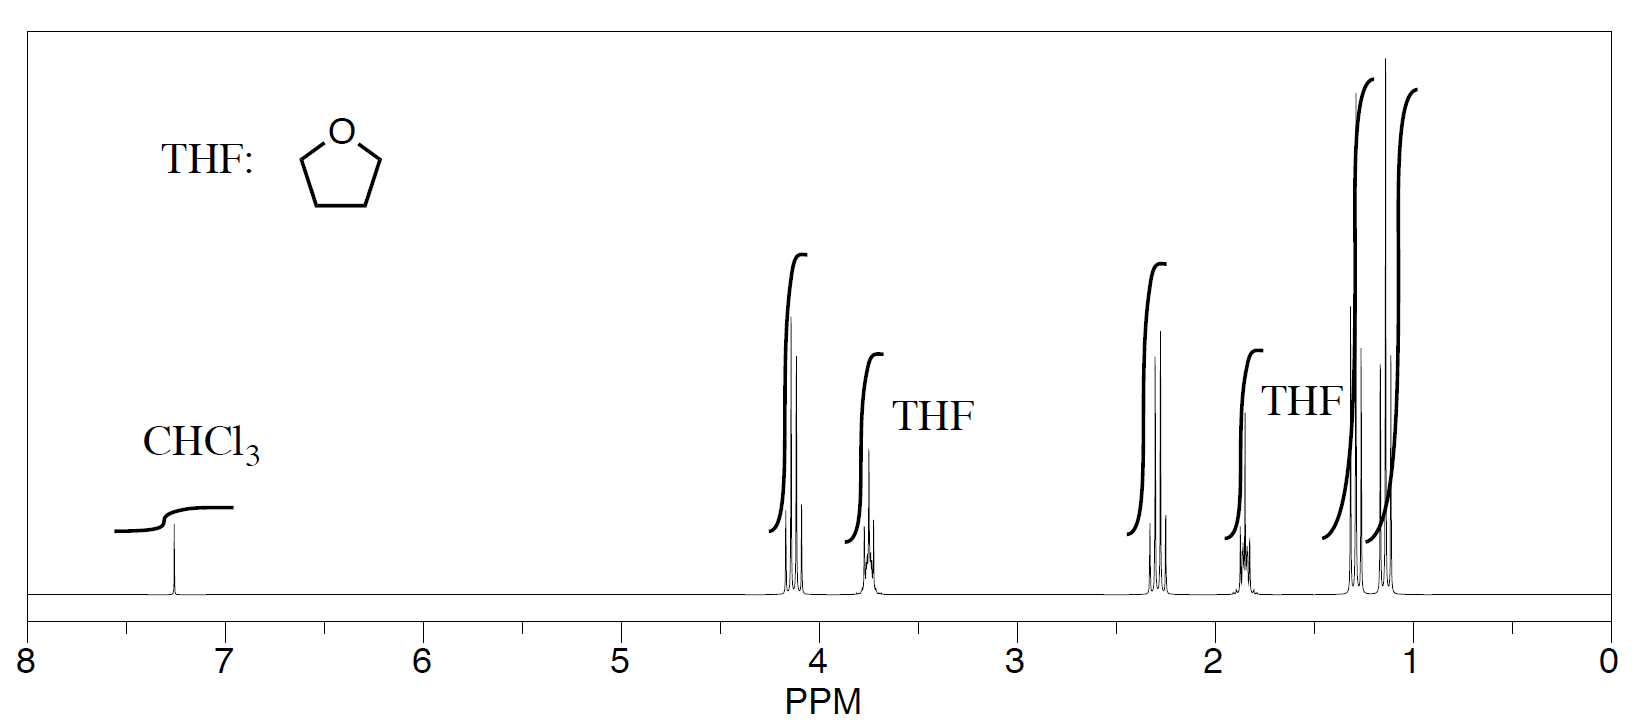 There are seven peaks on the H-NMR spectrum at 1.2, 1.4, 1.9, 2.2, 3.7, 4.1, and 7.3 ppm.